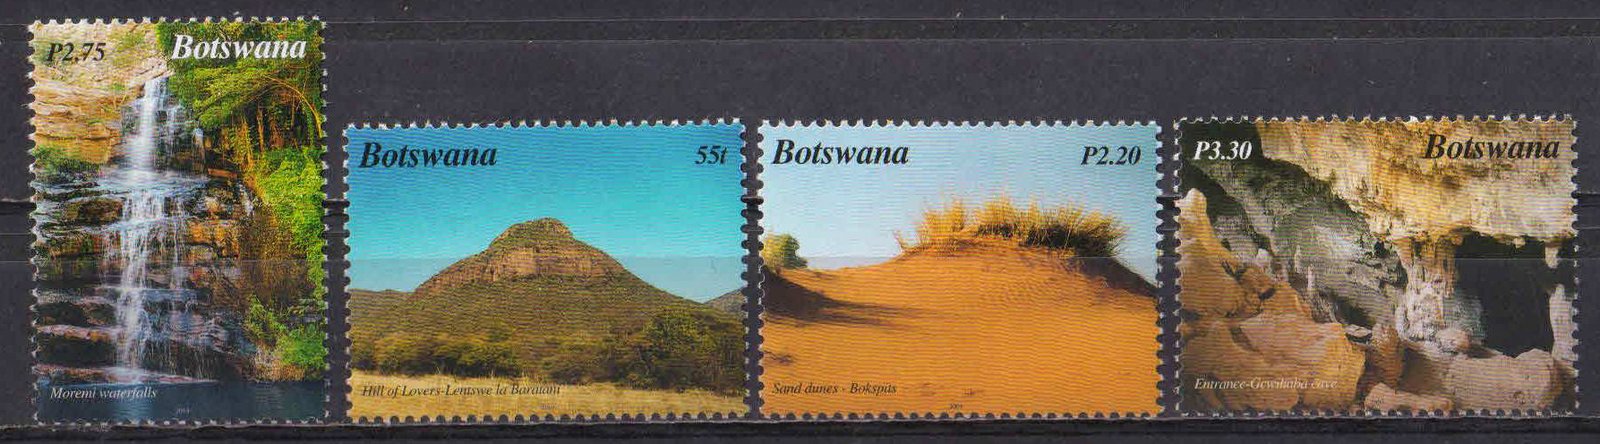 BOTSWANA 2003-Natural Places, Hills, Sand Dunes, Waterfall, Cave, Set of 4, MNH, S.G. 1000-1003-Cat � 6-